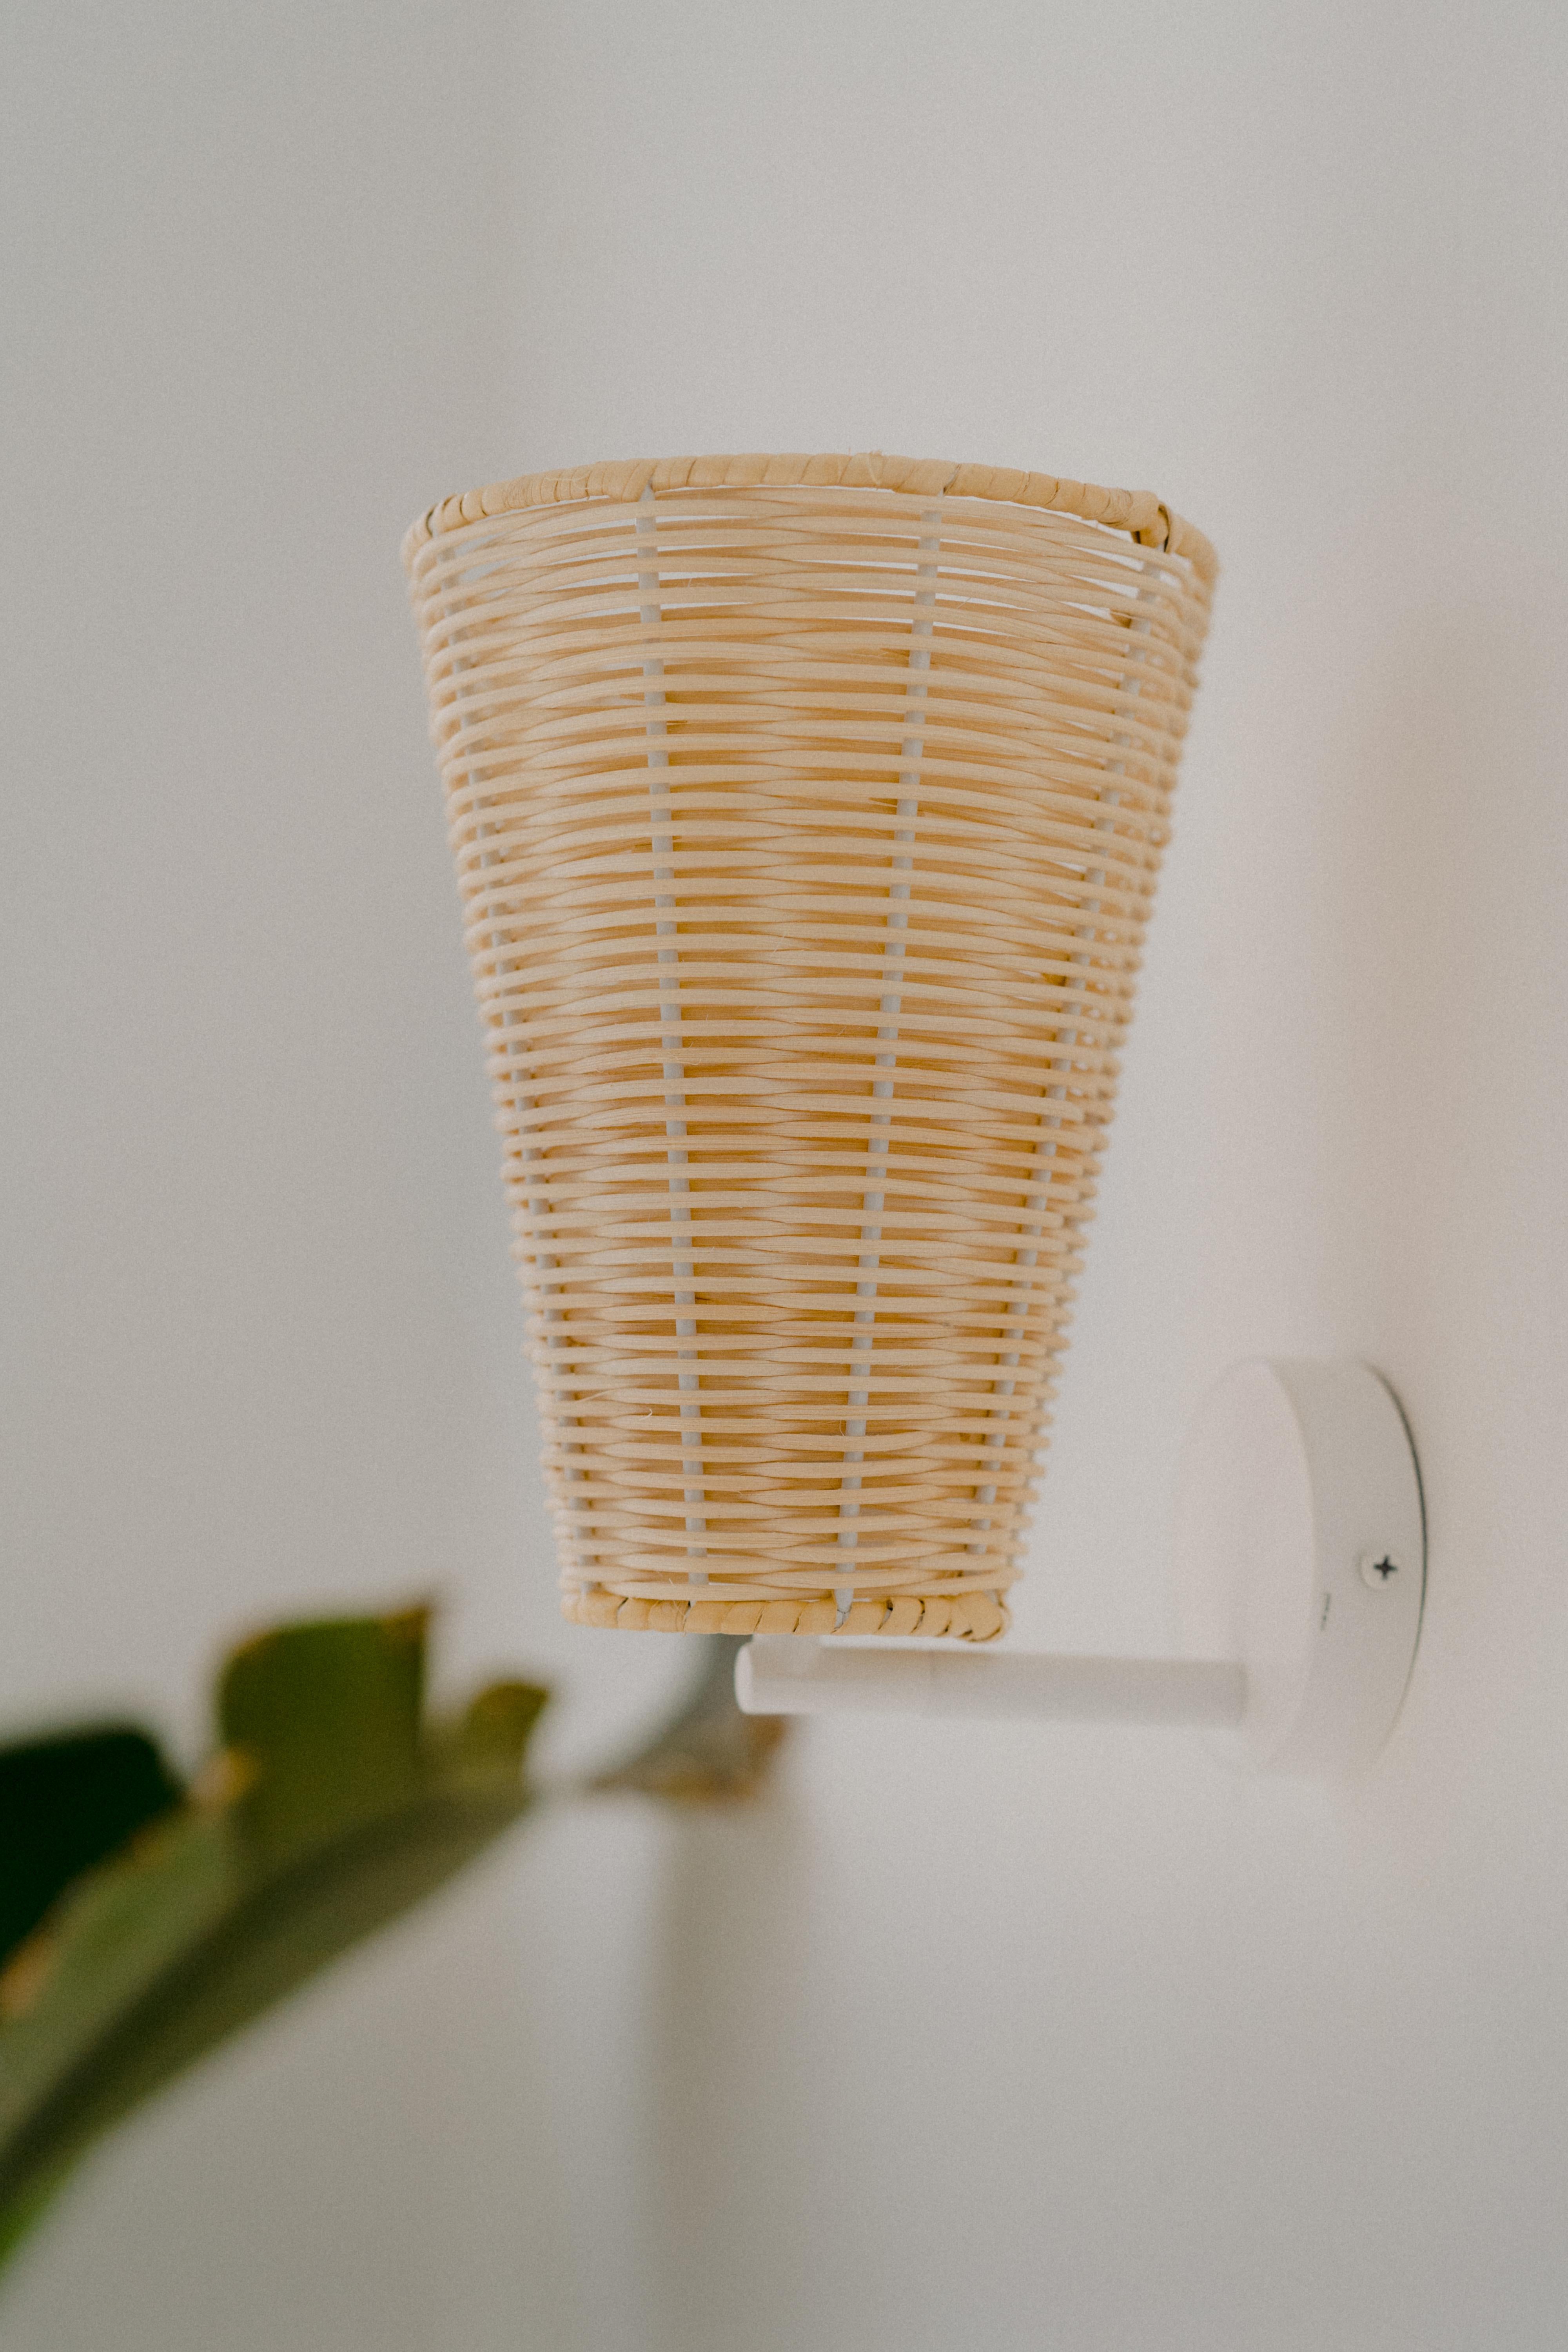 The Costa collection of simple lamps and in small sizes, was conceived to provide a natural and simple touch to the spaces.
All have been designed by Mediterranean Objects, and are handmade in Barcelona also by us.
Woven in natural rattan, protected